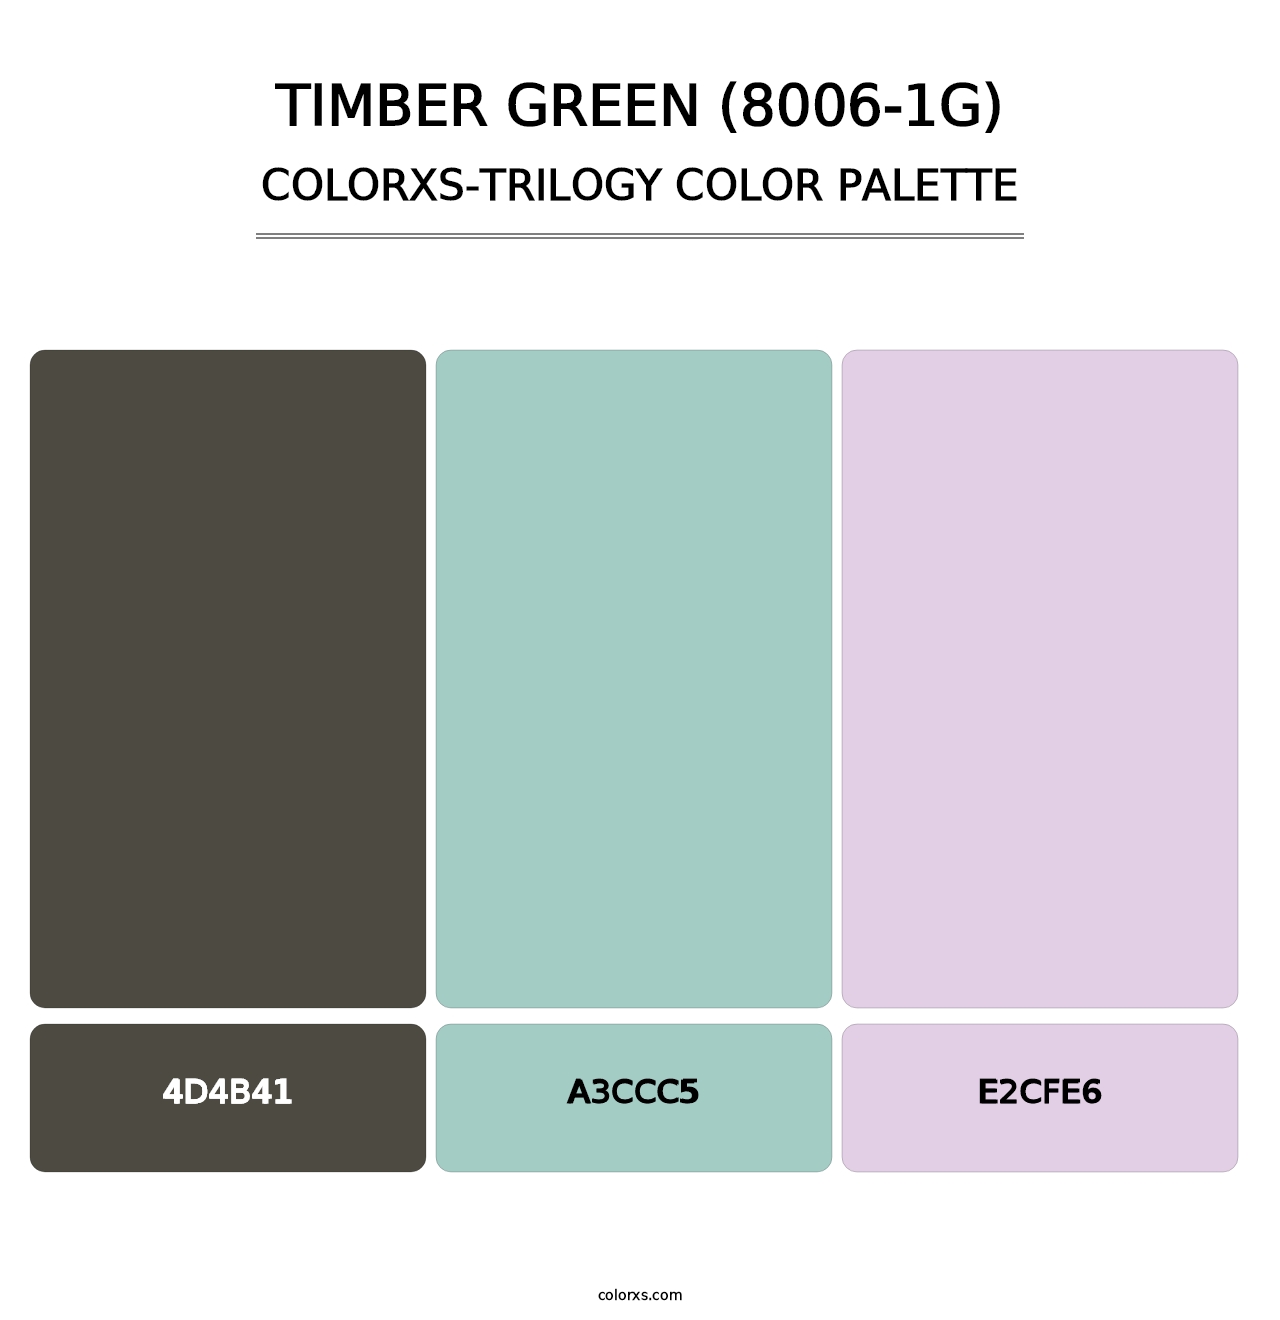 Timber Green (8006-1G) - Colorxs Trilogy Palette